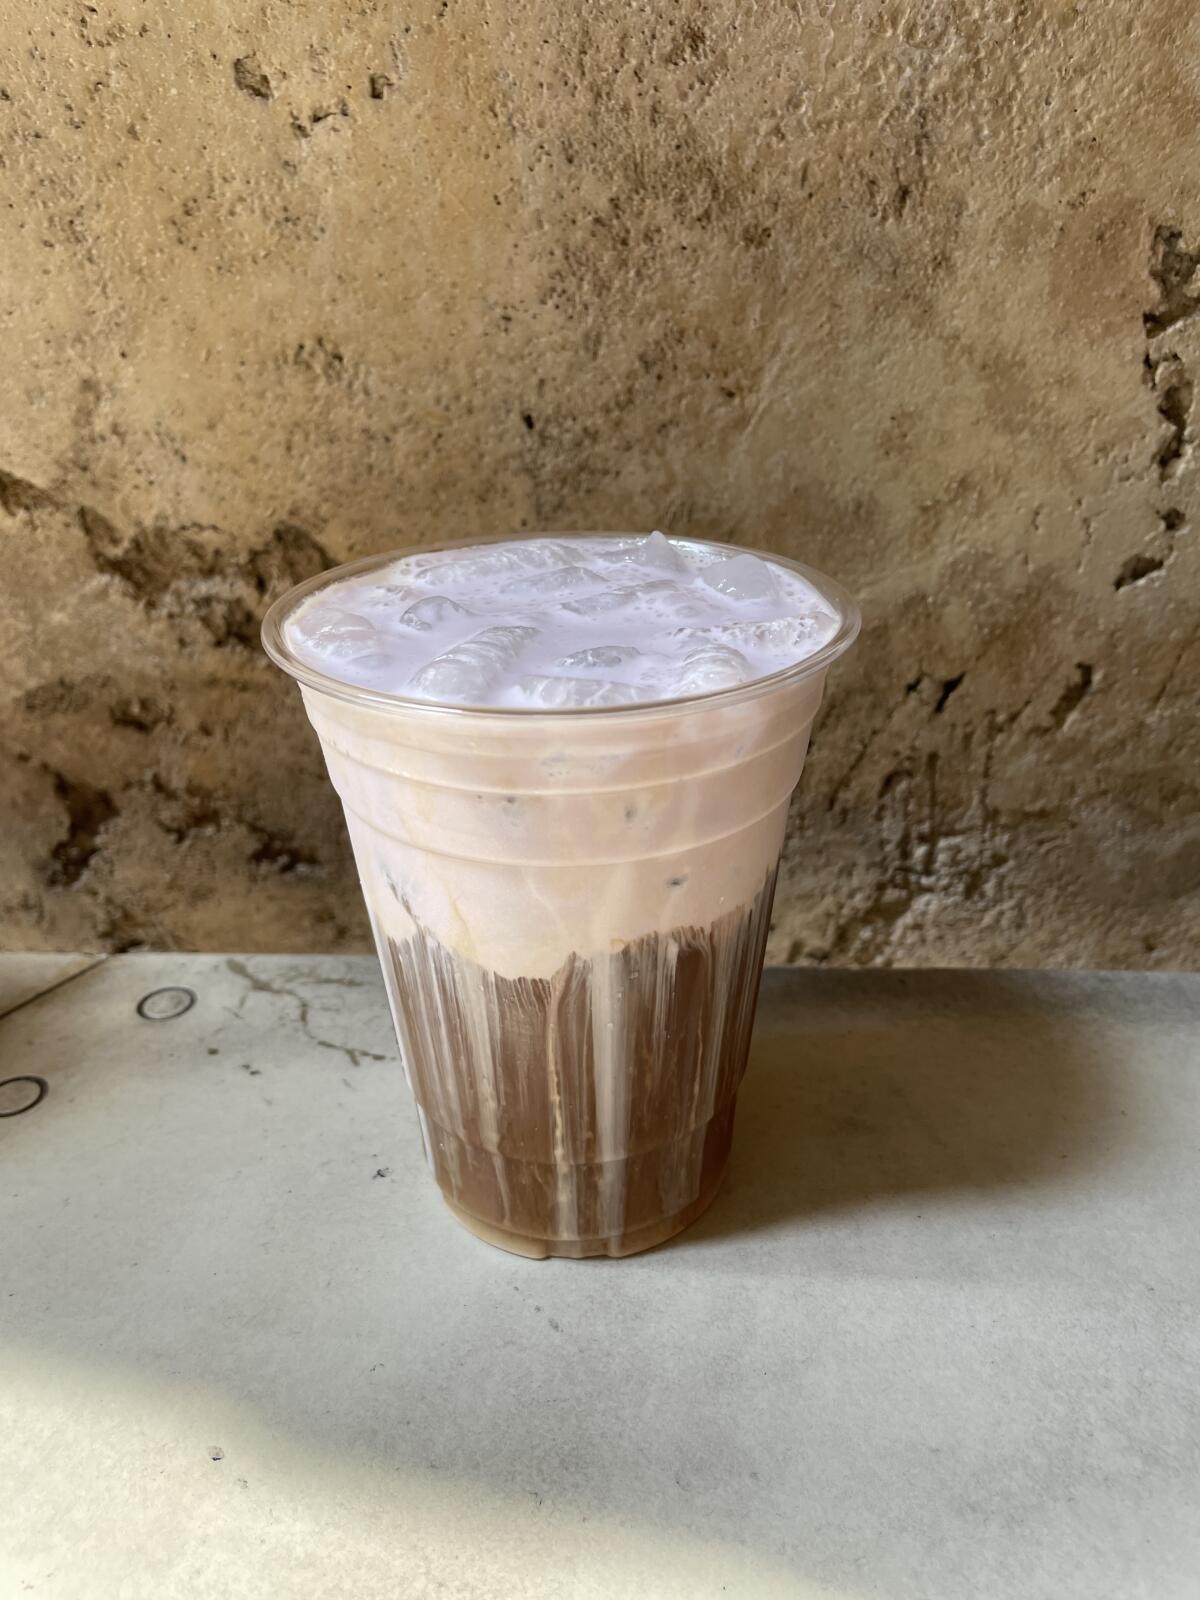 A Cold Brew Black Caf with Taro Topper at Docking Bay 7 Food and Cargo inside Star Wars: Galaxy's Edge at Disneyland.